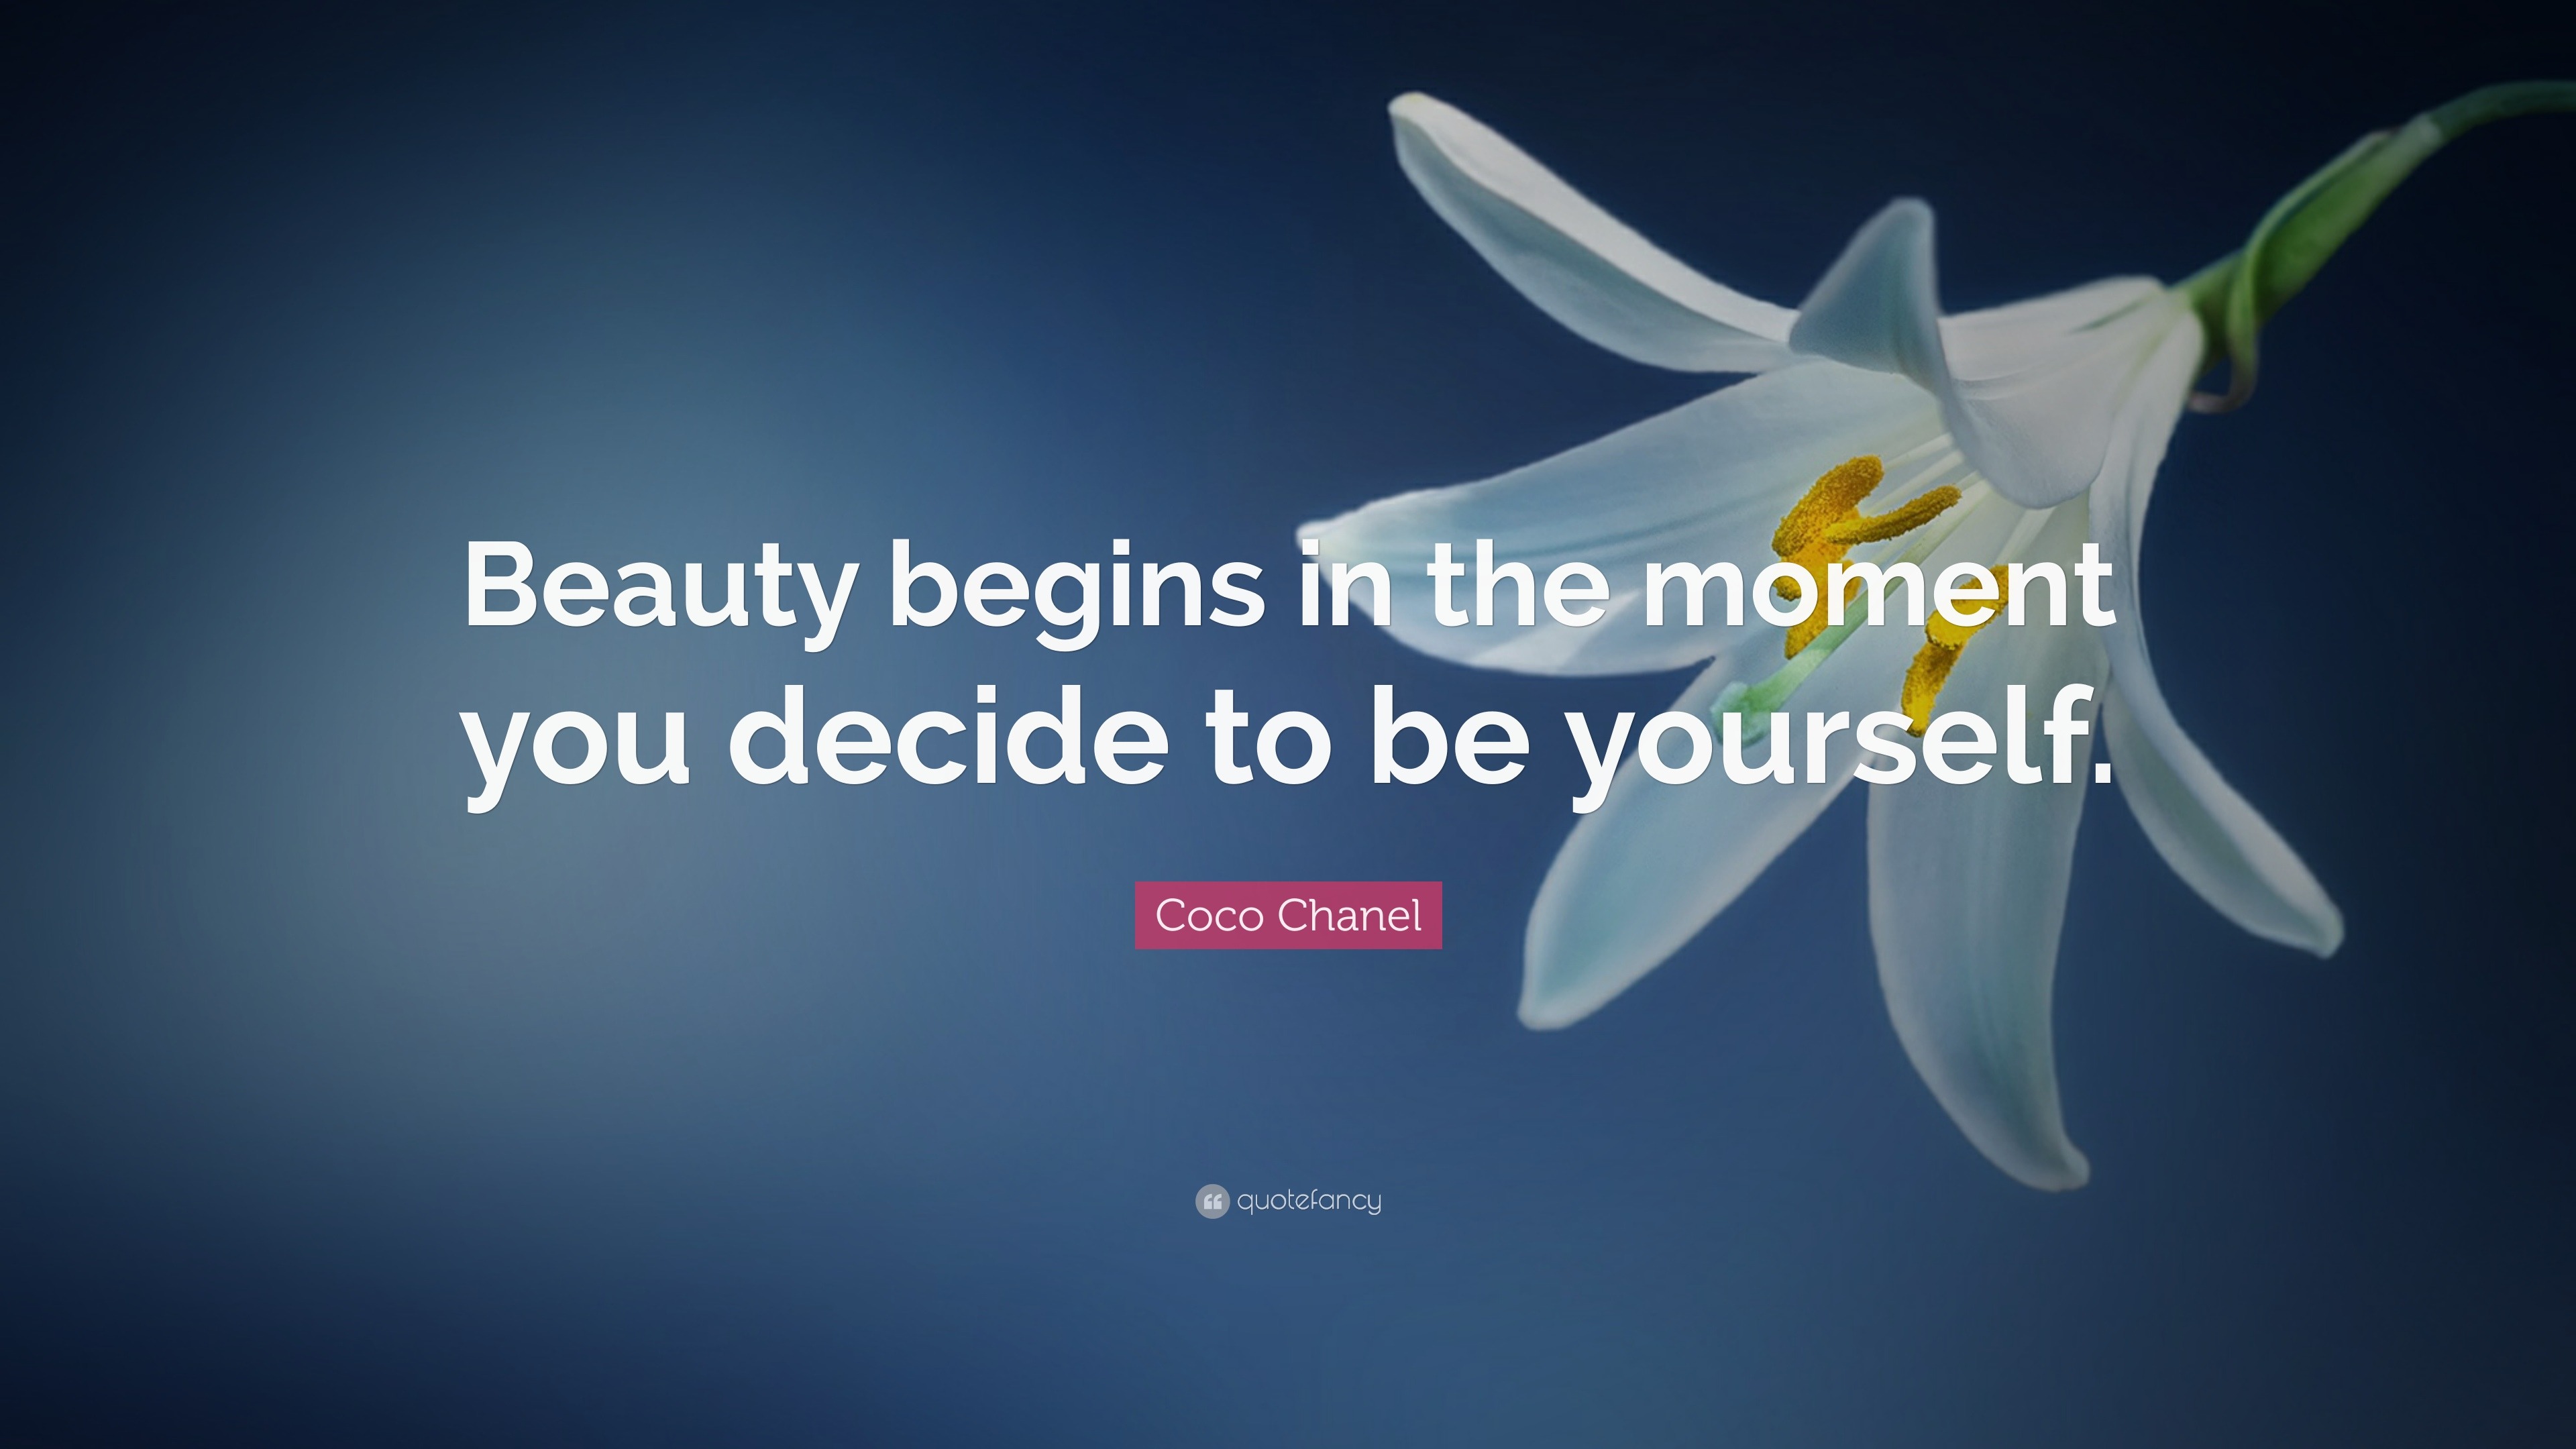 Coco Chanel Quote: “Beauty begins in the moment you decide to be yourself.”